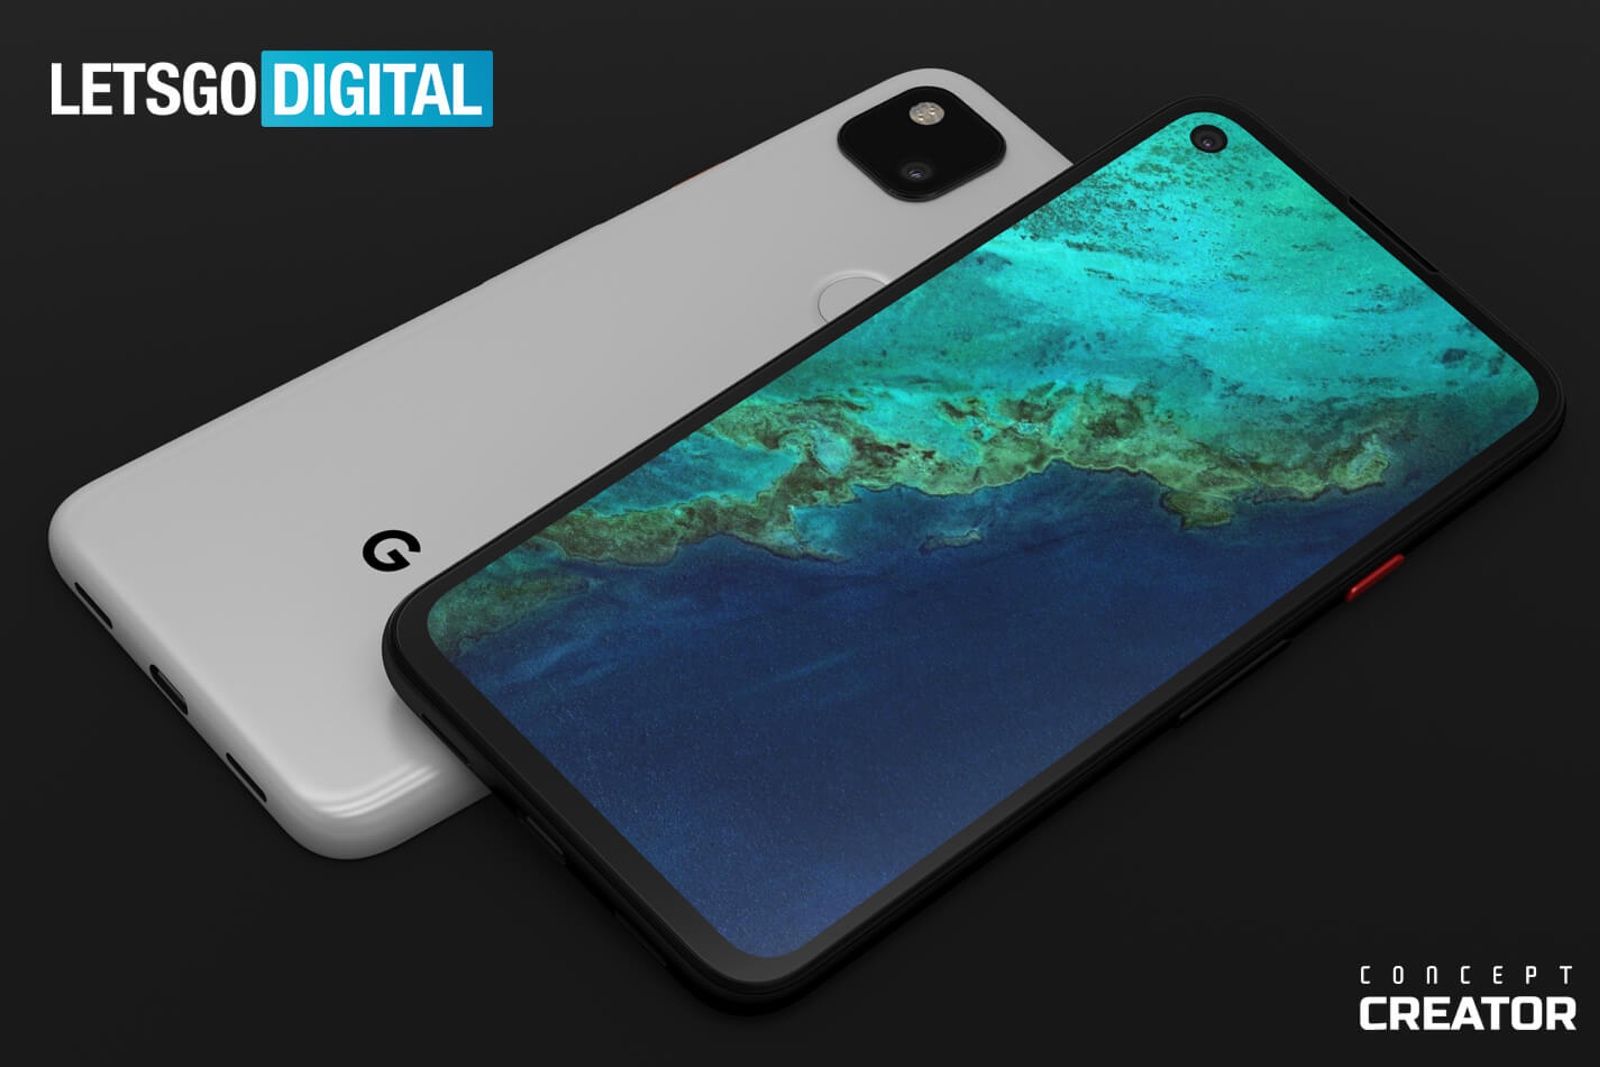 Renders show what the Google Pixel 4a could look like image 2